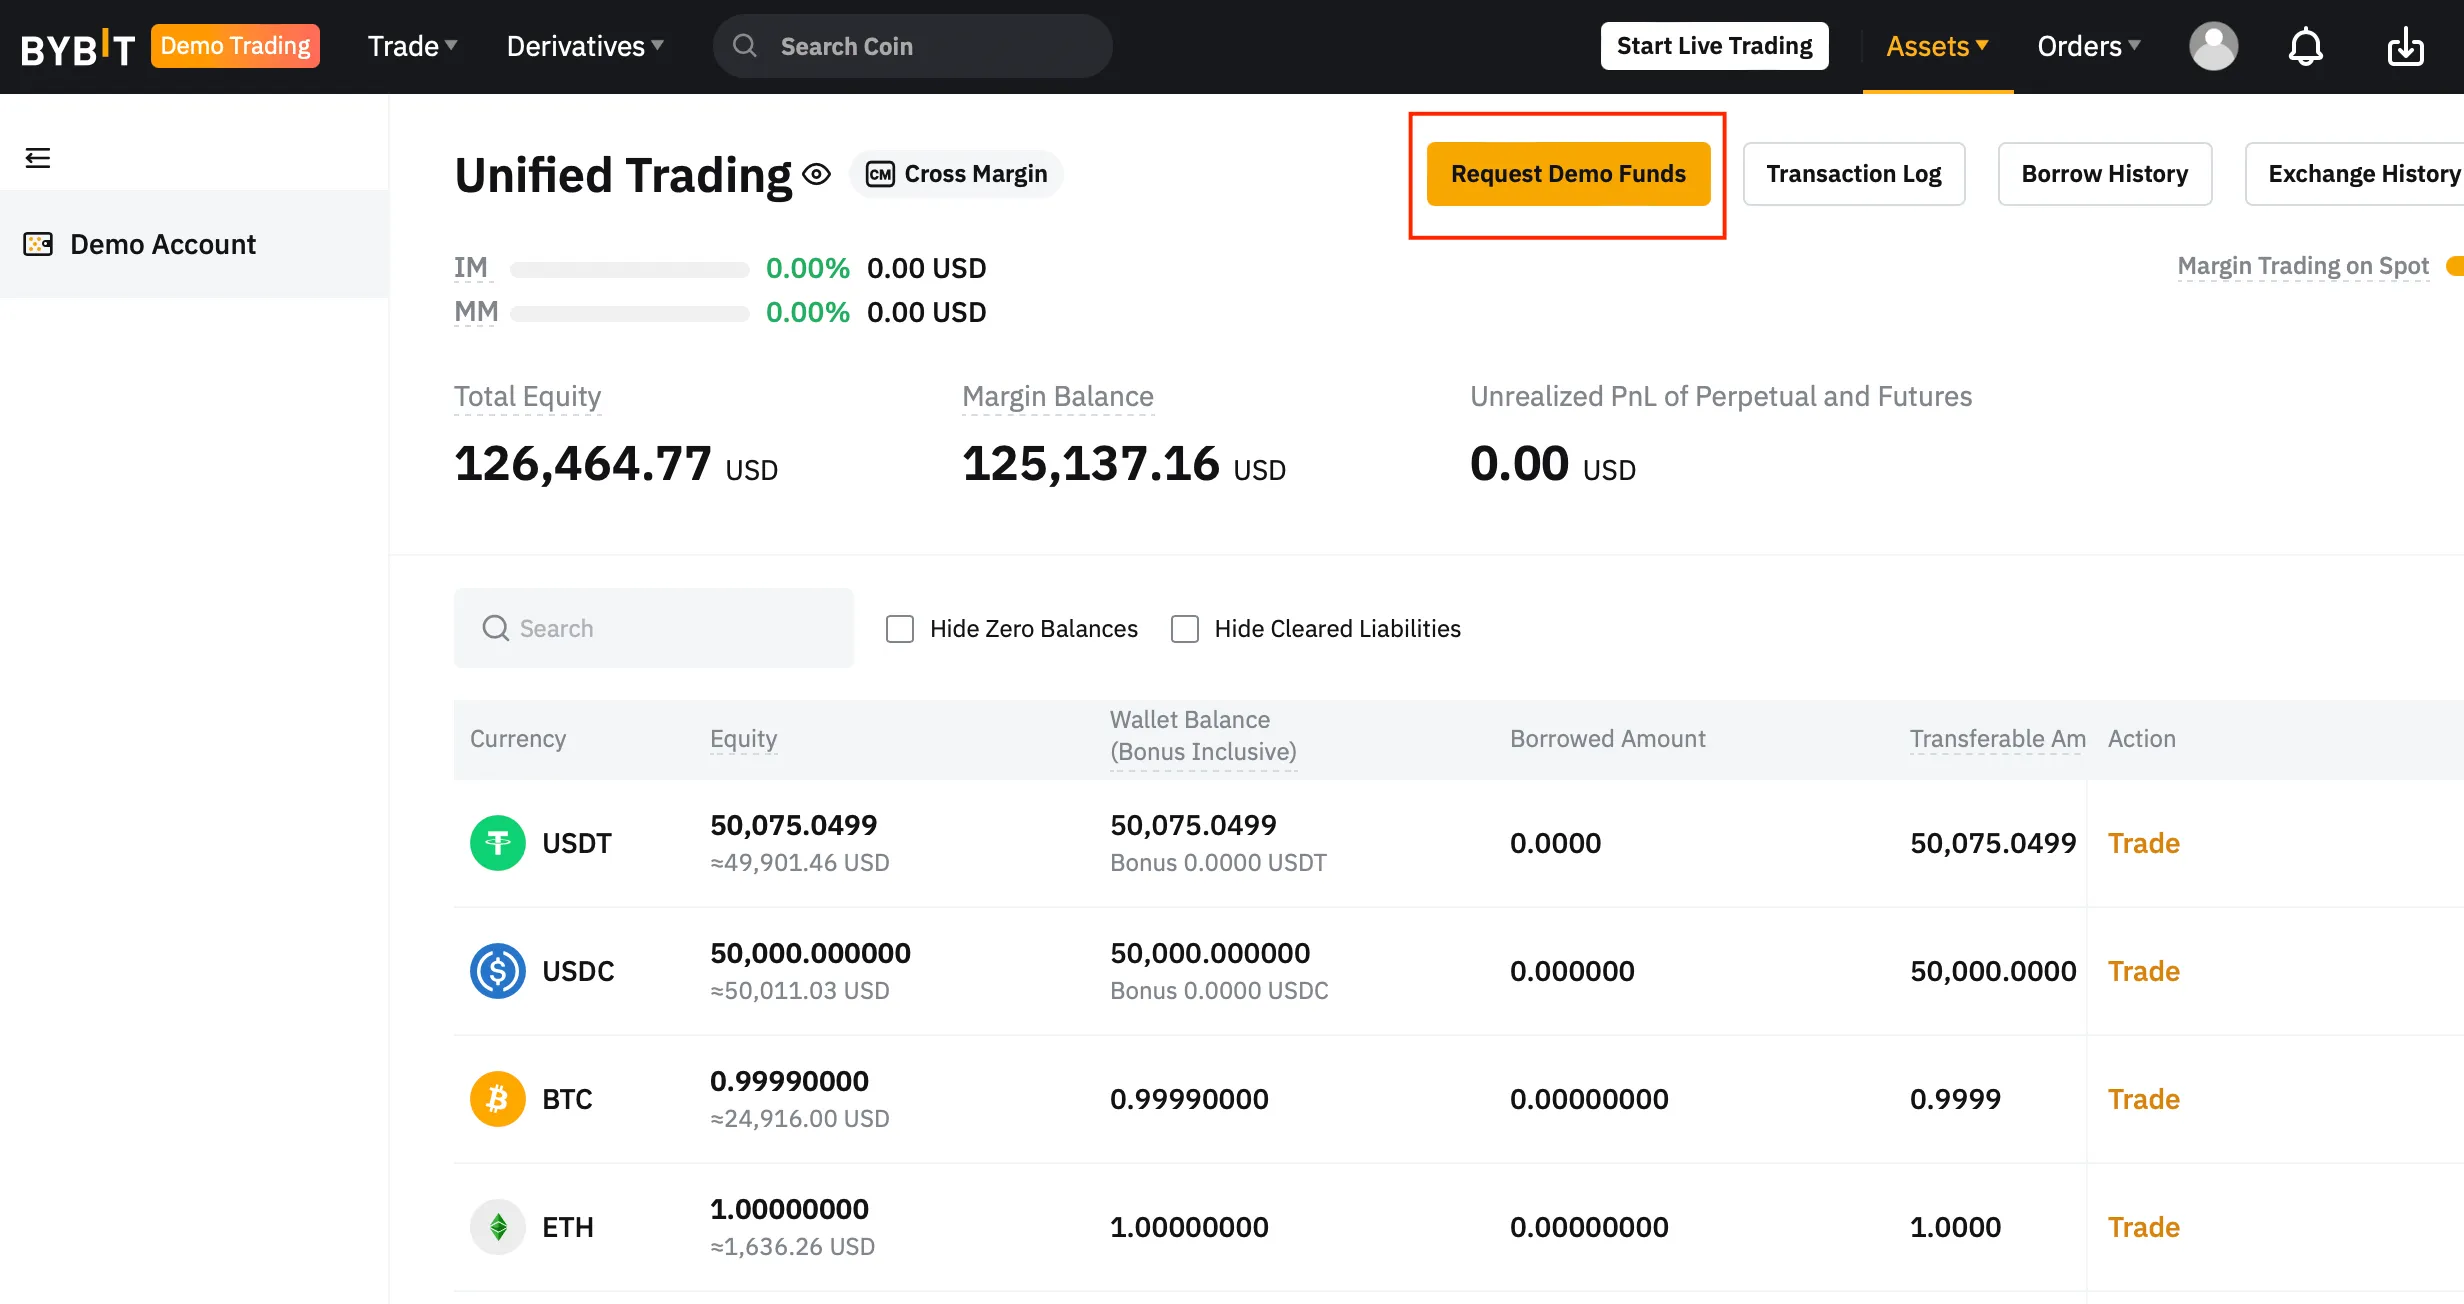 How to Use Bybit Demo Trading (Step-By-Step)